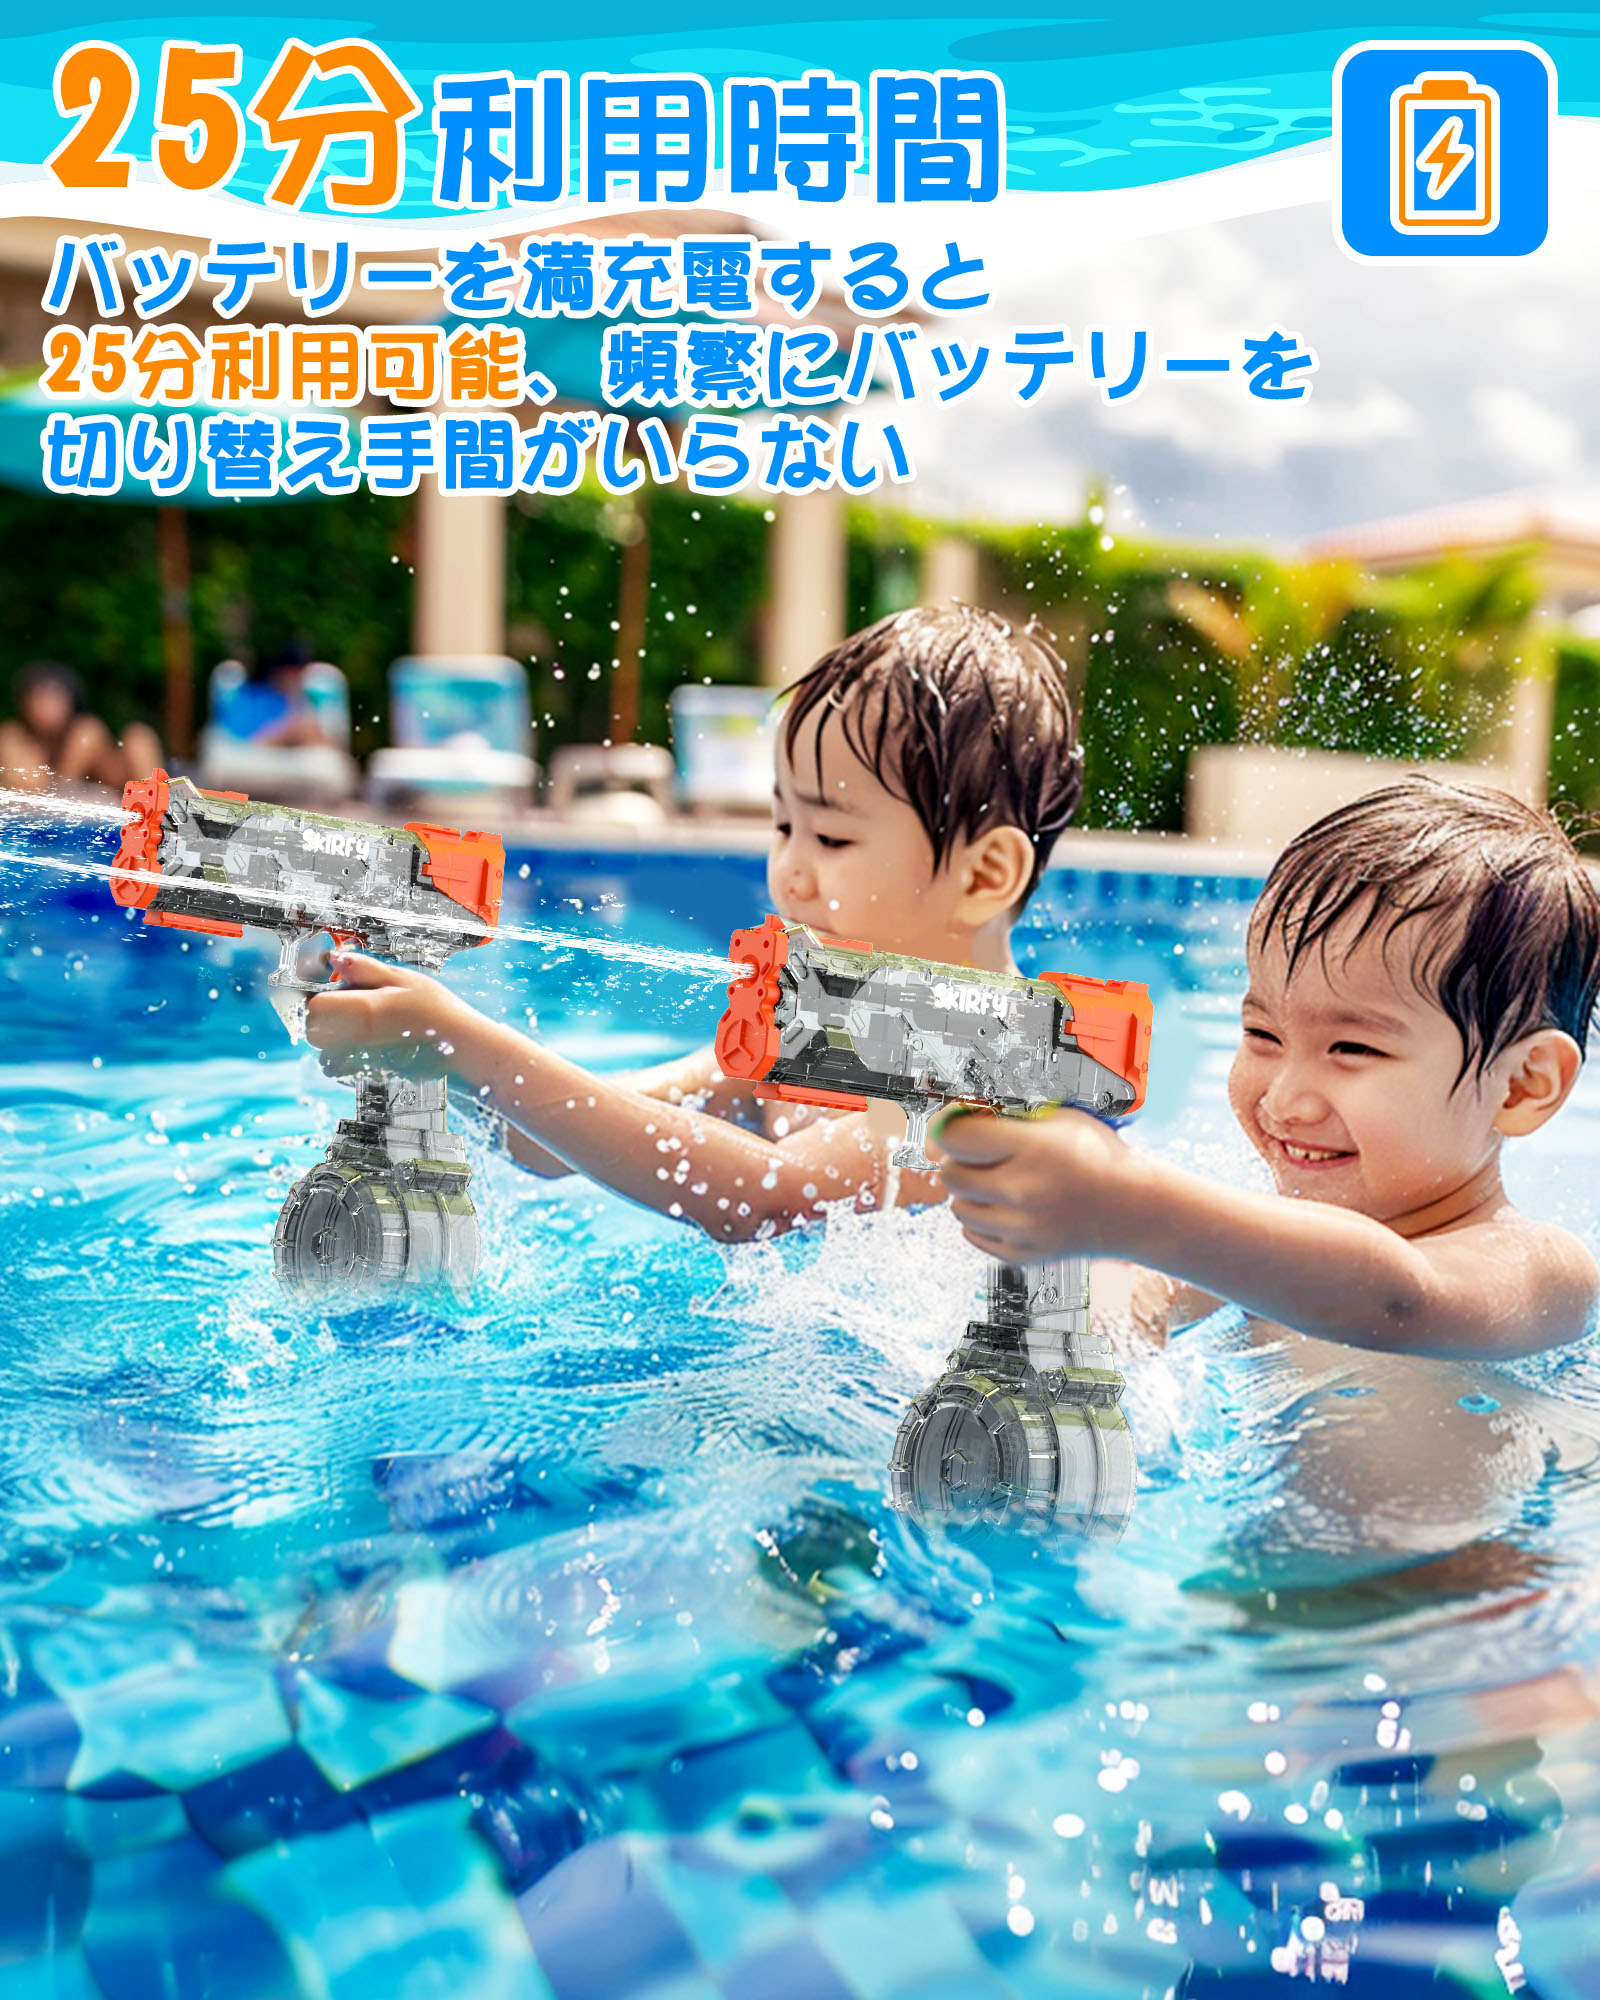 EagleStone water pistol electric water pistol water gun toy playing in water ream departure . water 500ml. water amount rechargeable waterproof battery protection glasses attached summer present 